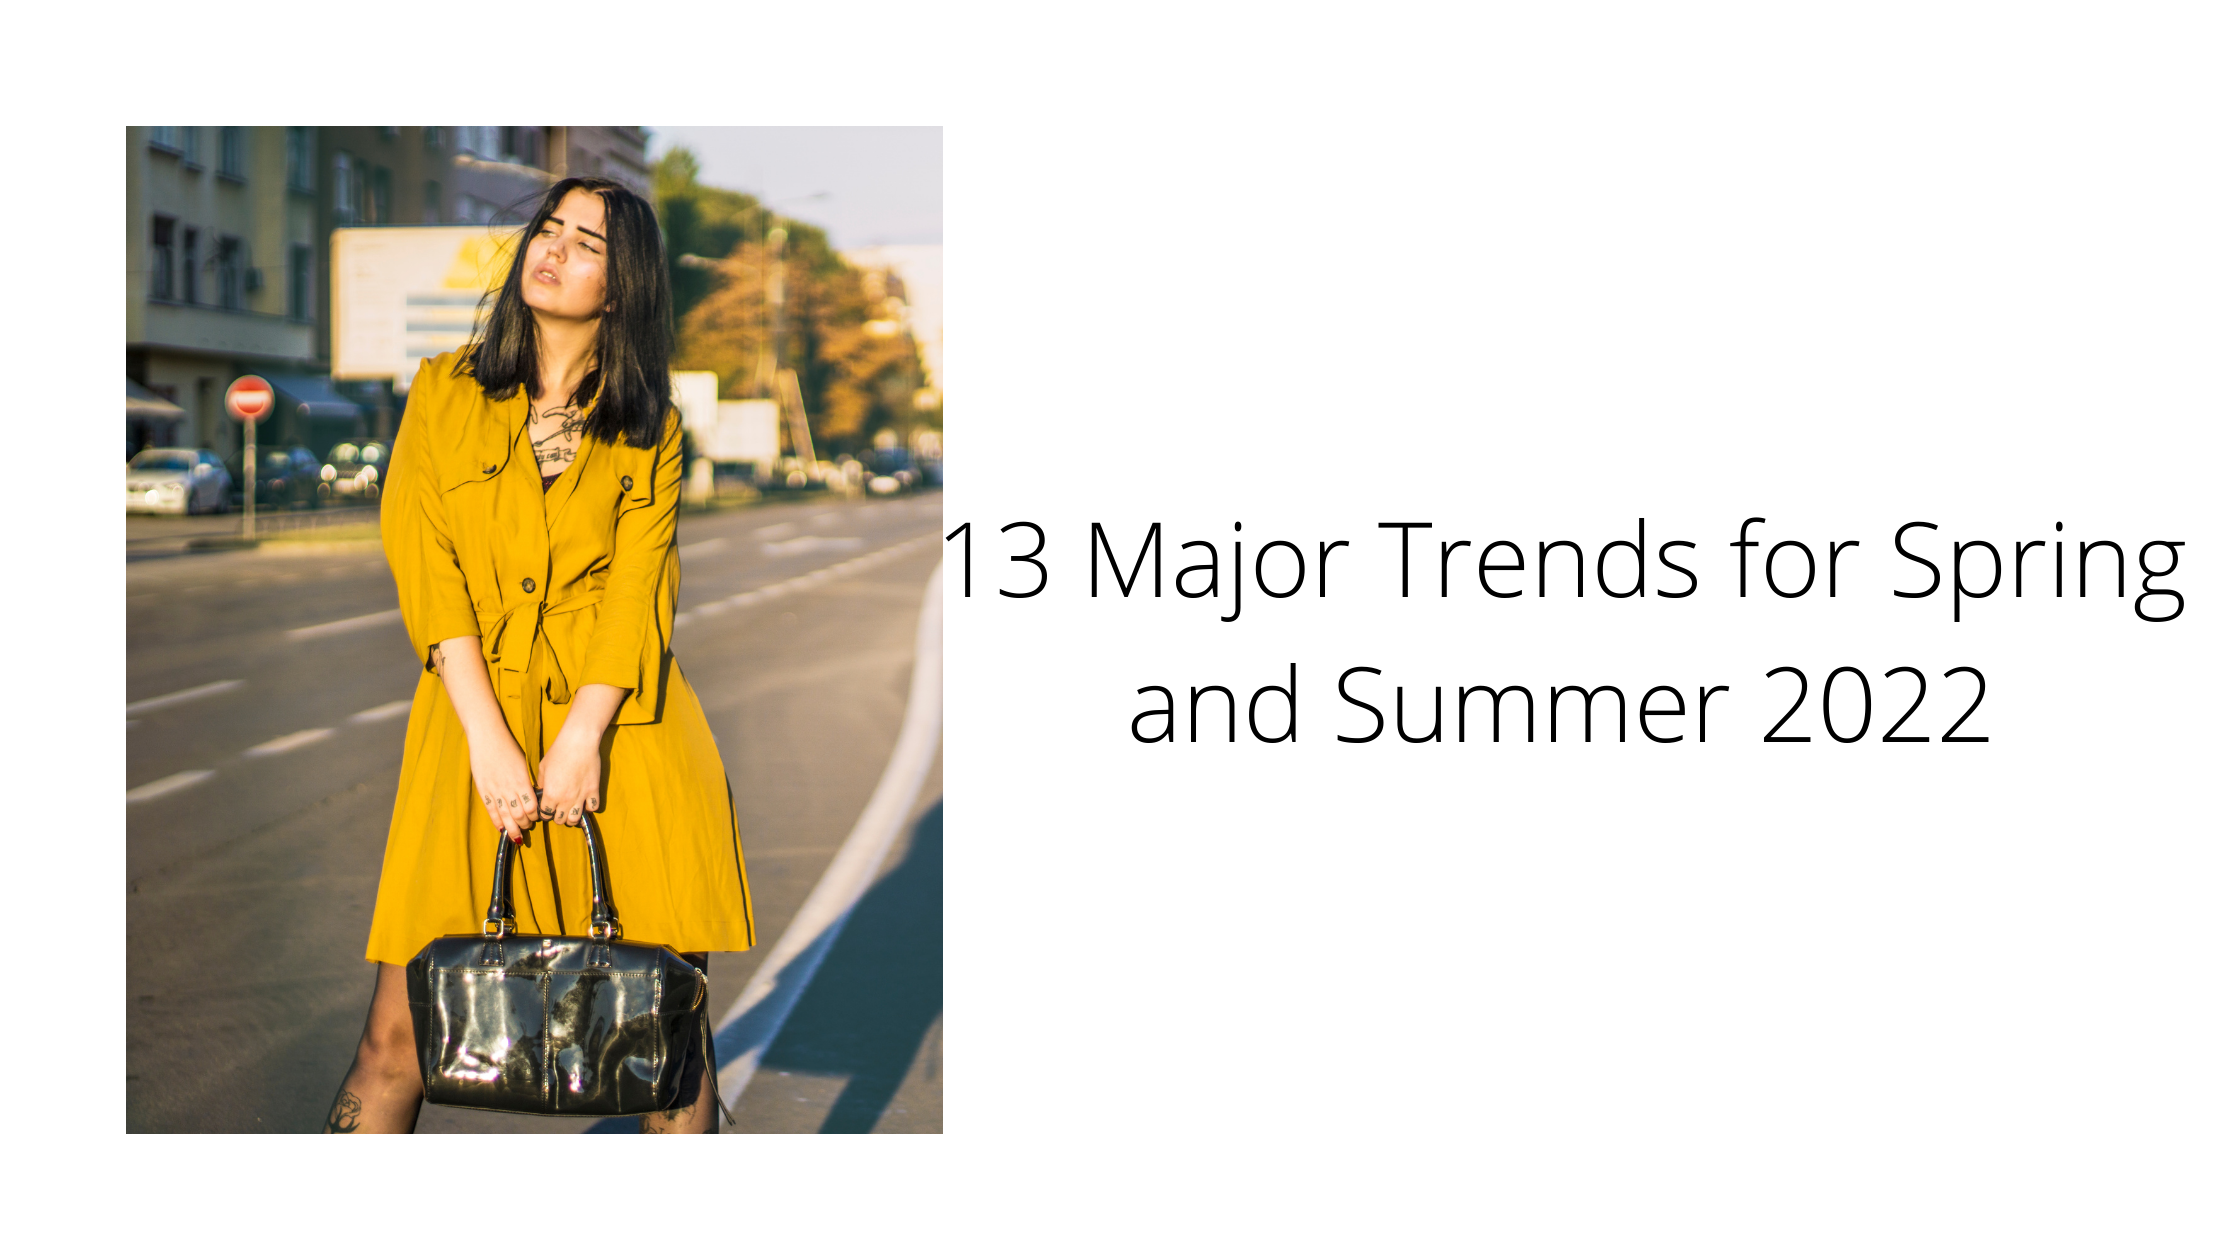 13 Major Trends for Spring and Summer 2022